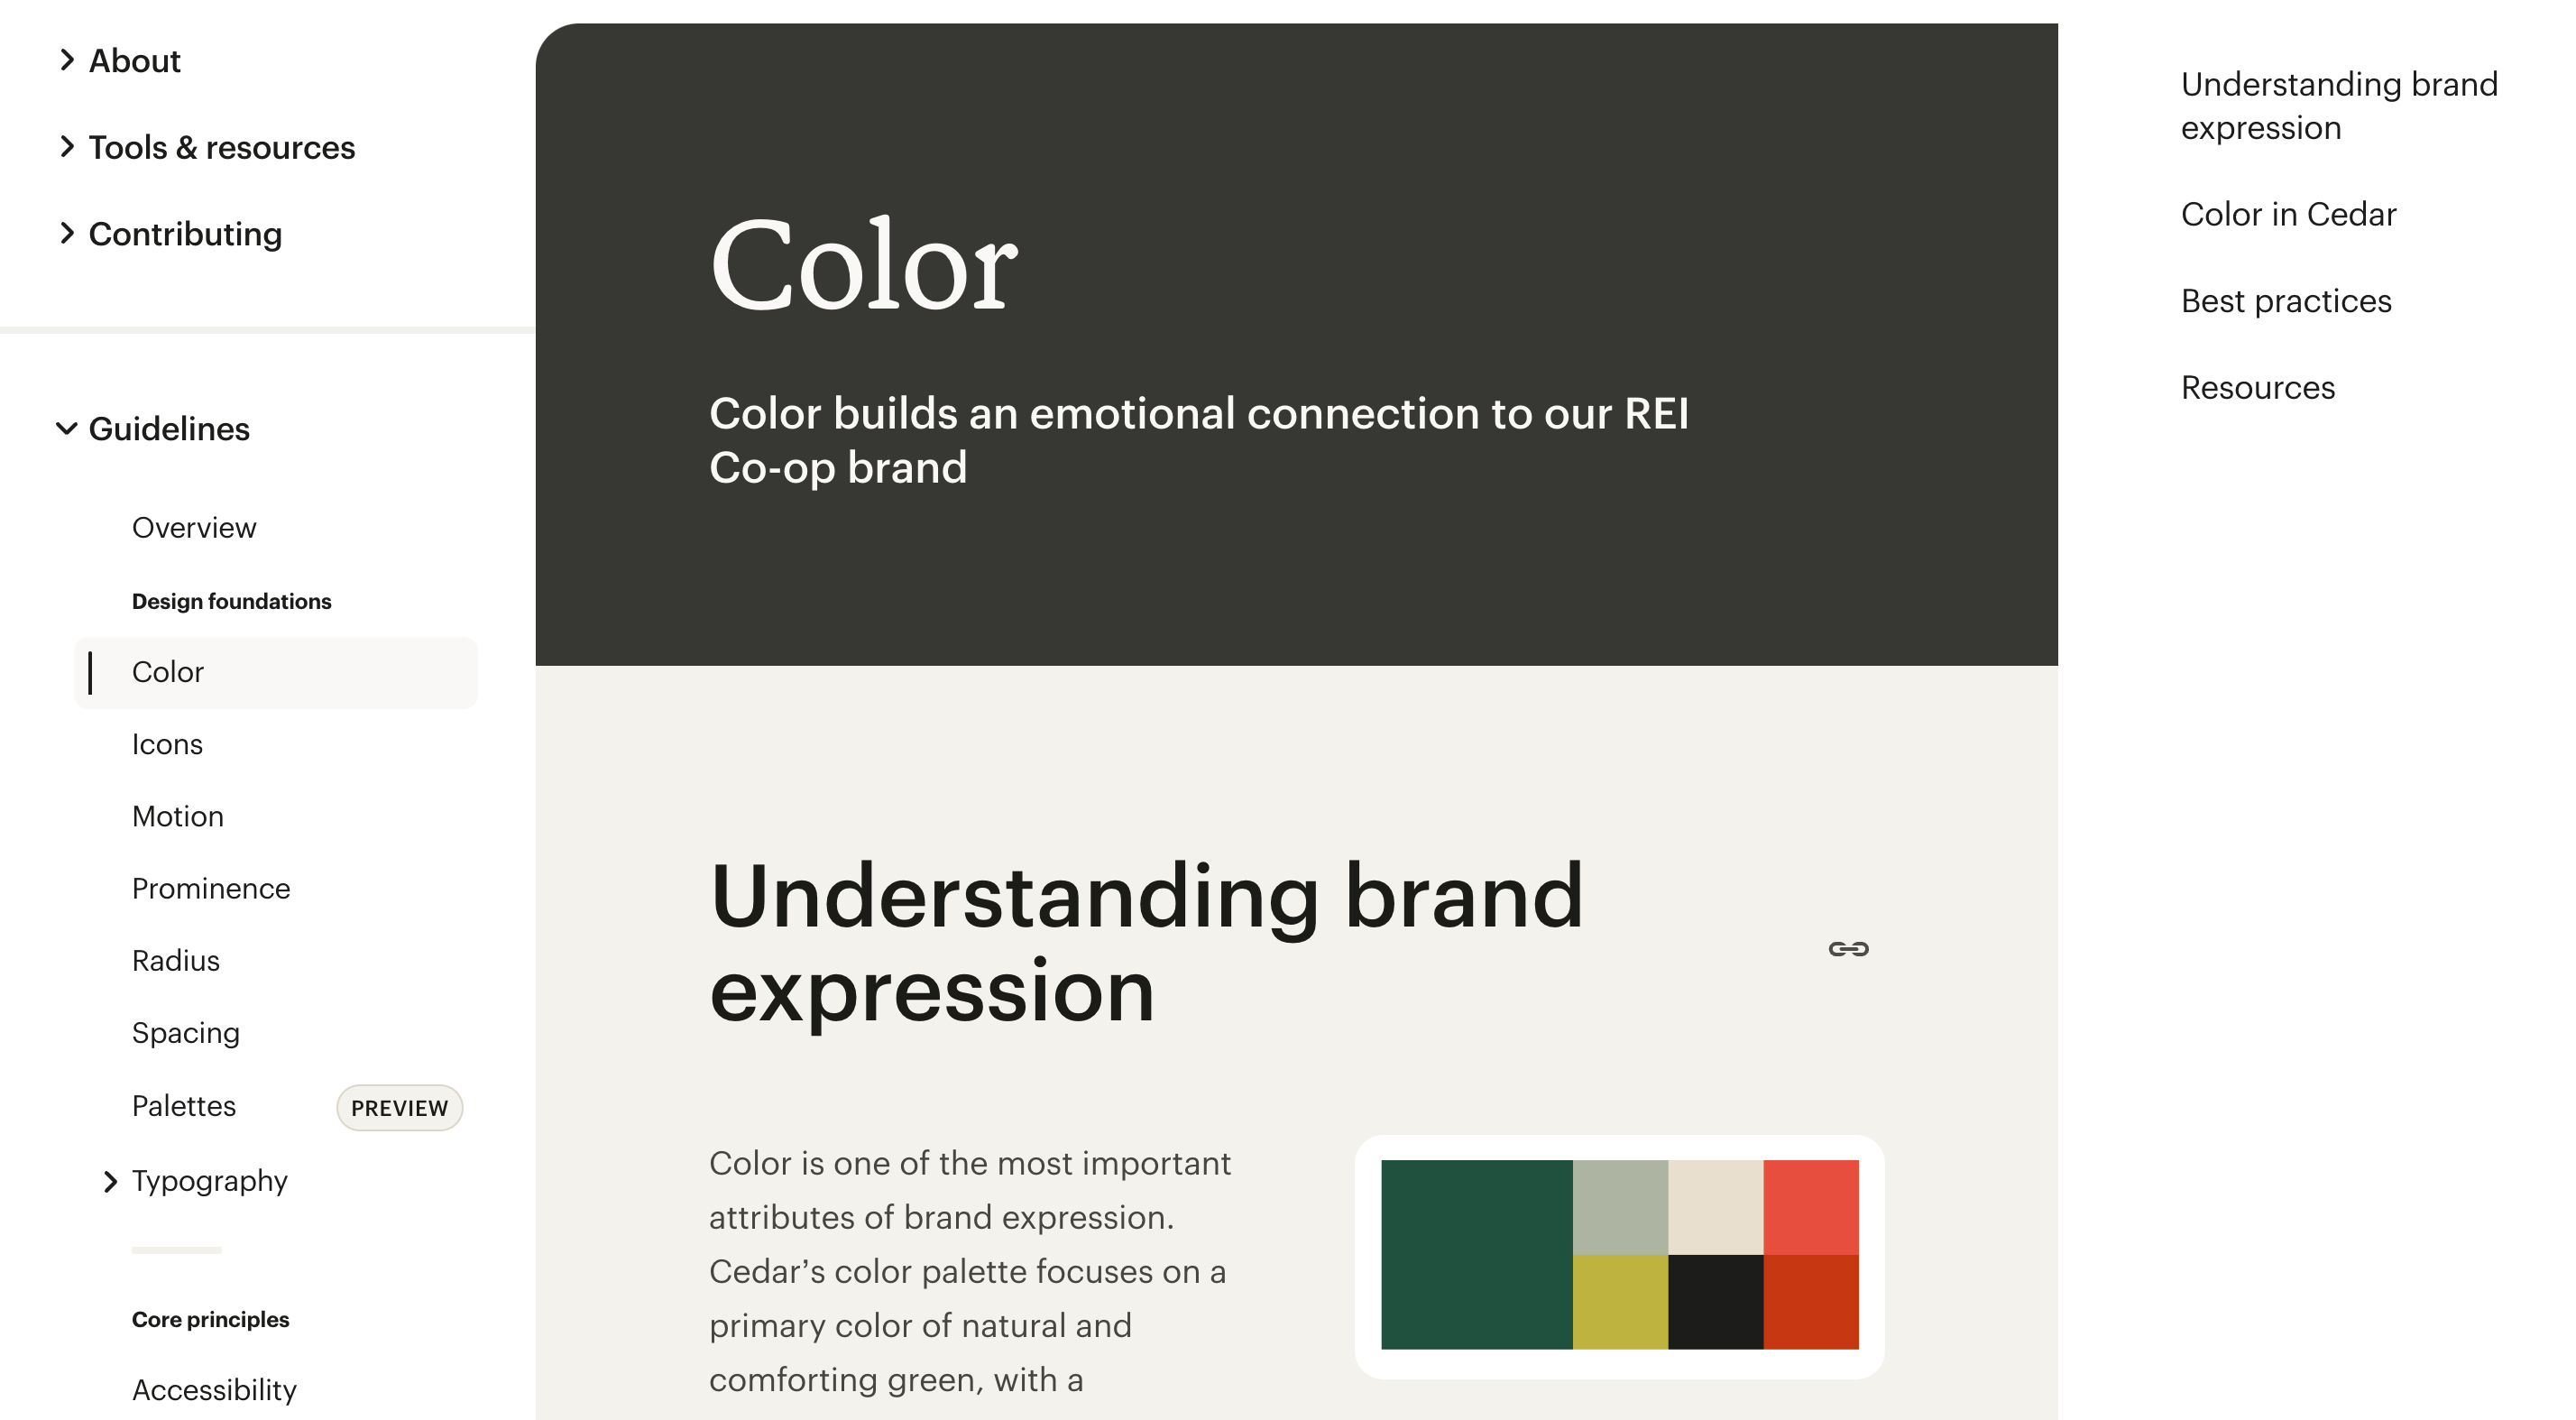 Brand Guidelines: How To Create a Style Guide for Your Business